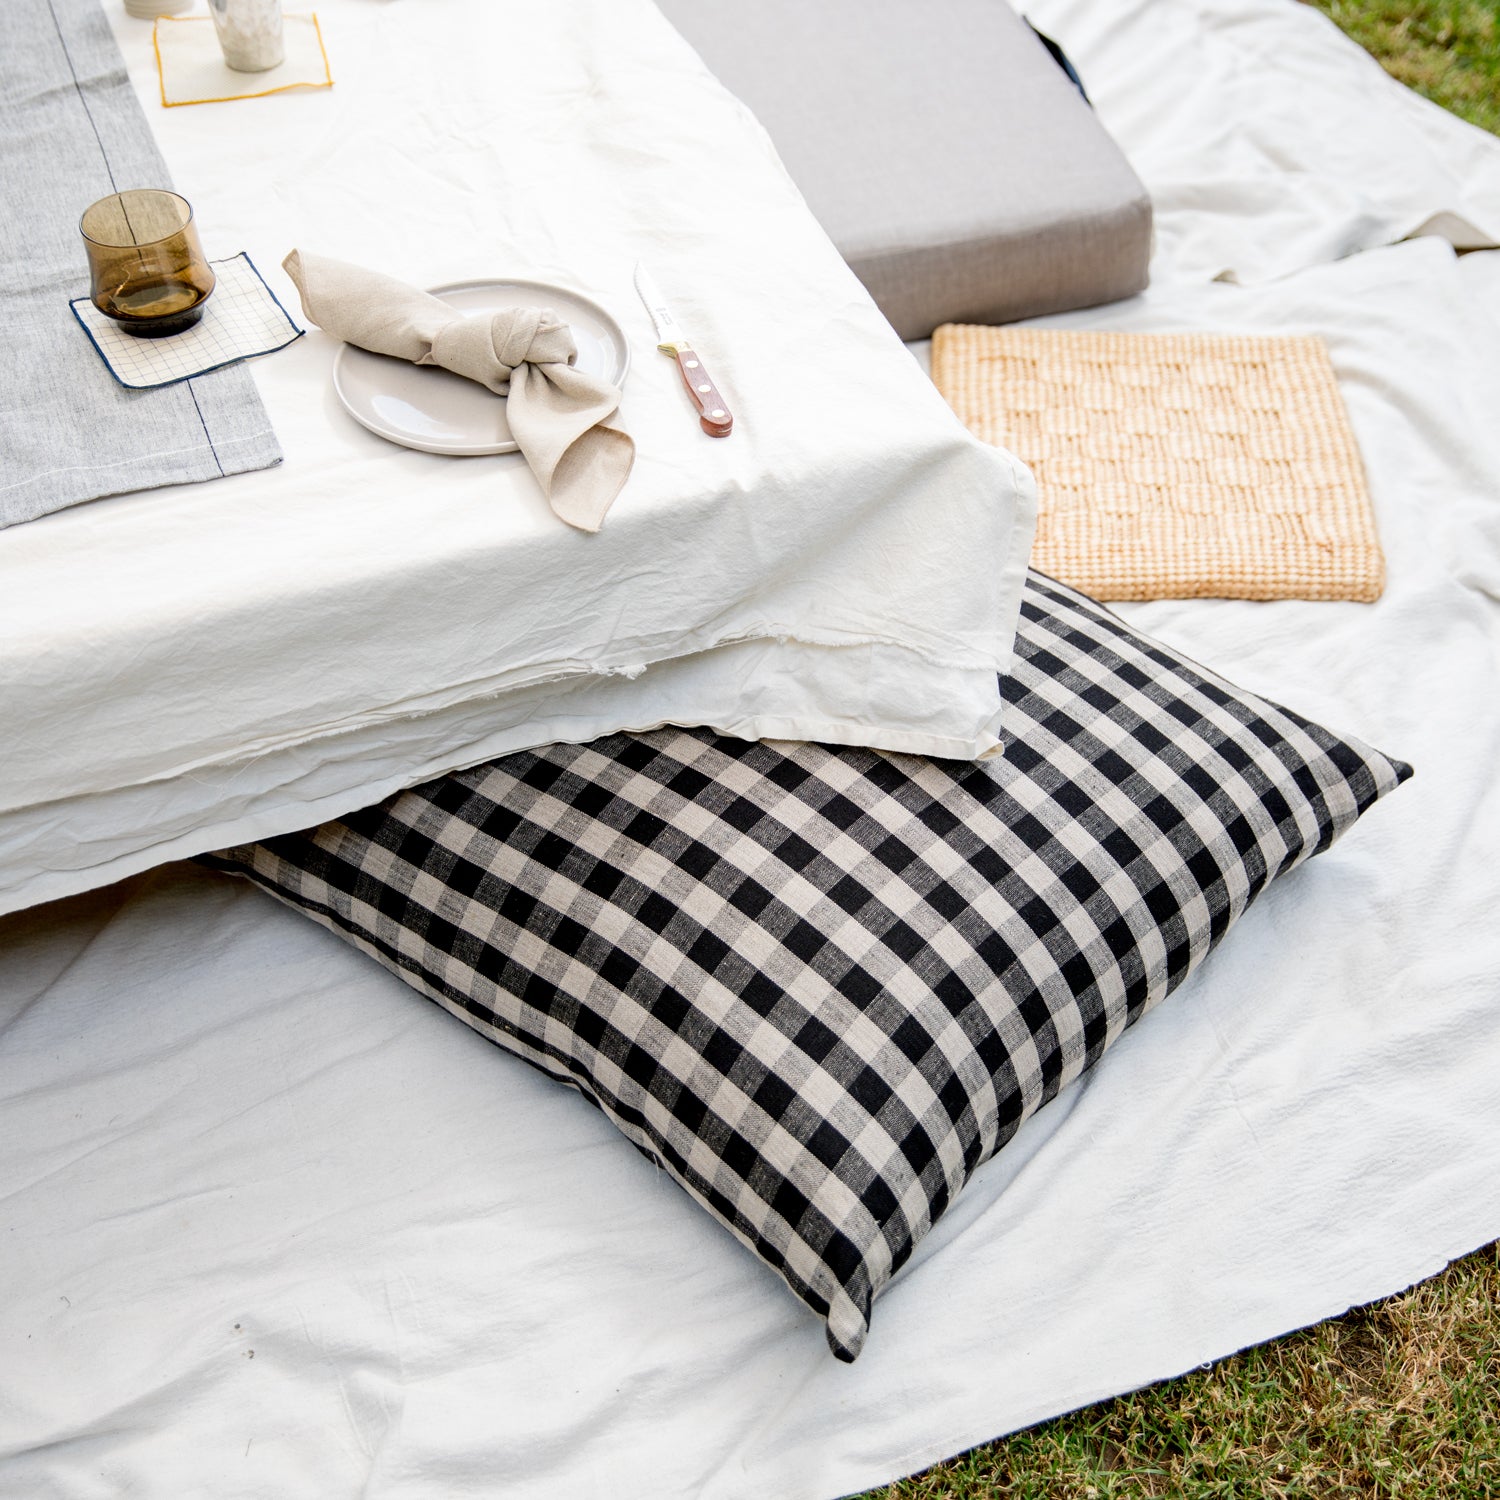 outdoor table on picnic blanket with a black and white gingham pillow